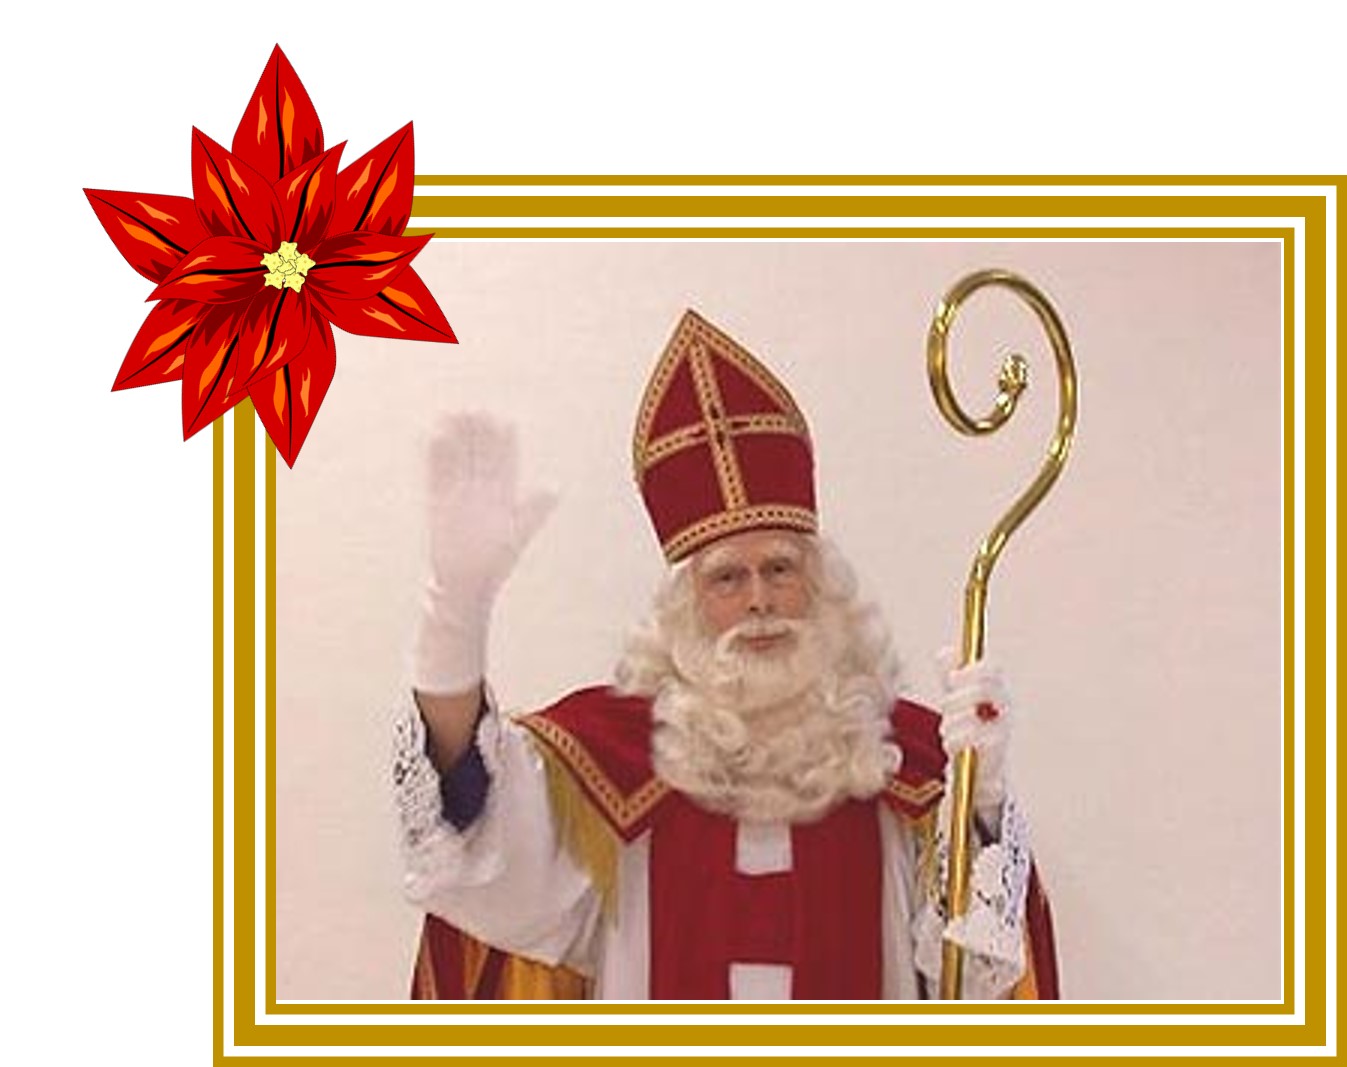 Christmas in the Netherlands features Sinterklaas, who holds a cane and wears a tall hat. | OrnamentShop.com